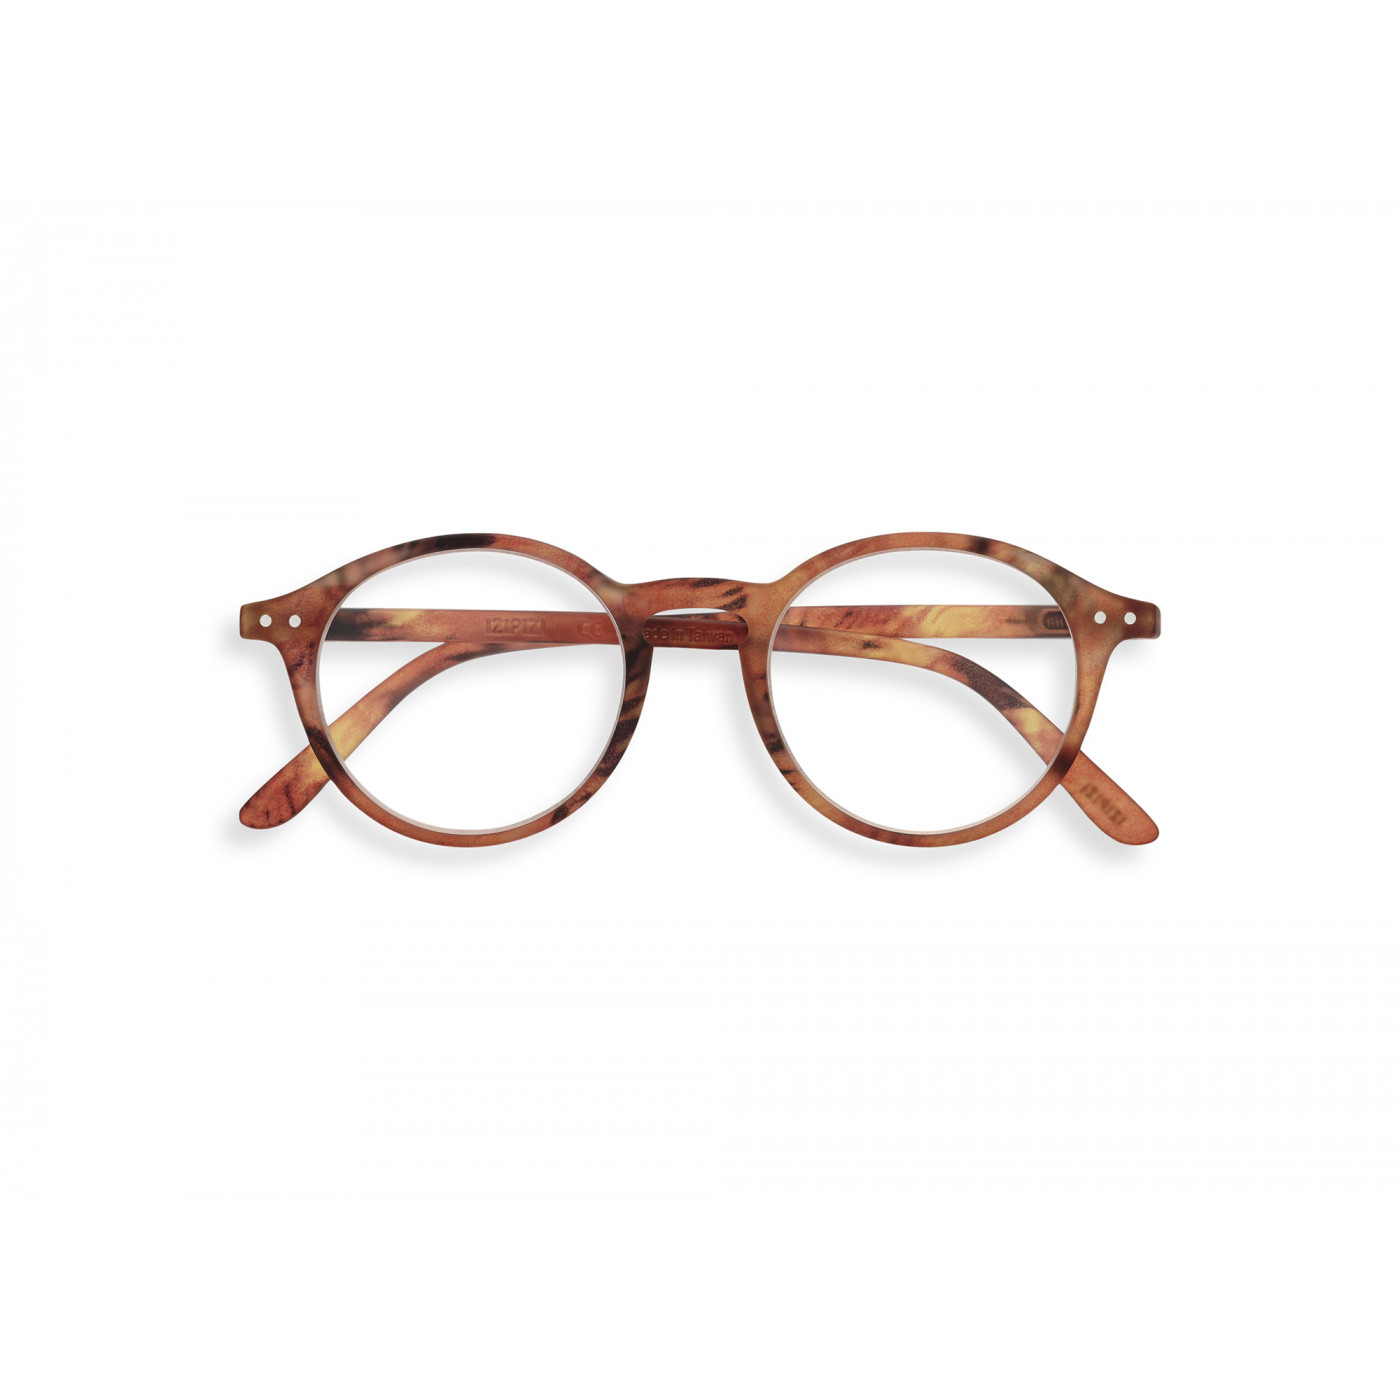 Reading glasses frame D wild Bright by Izipizi Essentia collection